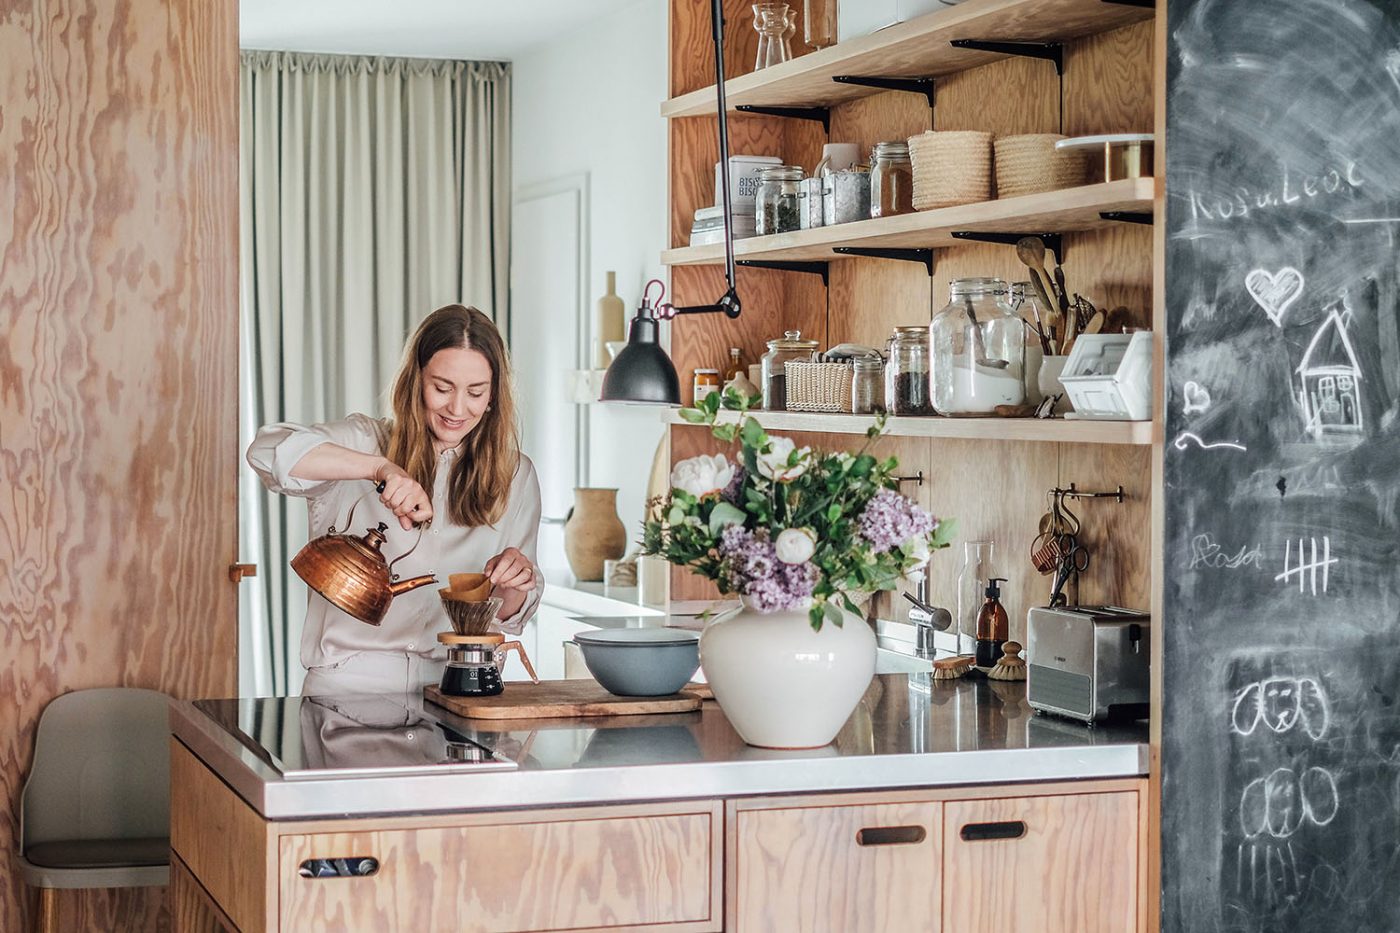 Home Tour with Anna Cor in Berlin - Our Food Stories